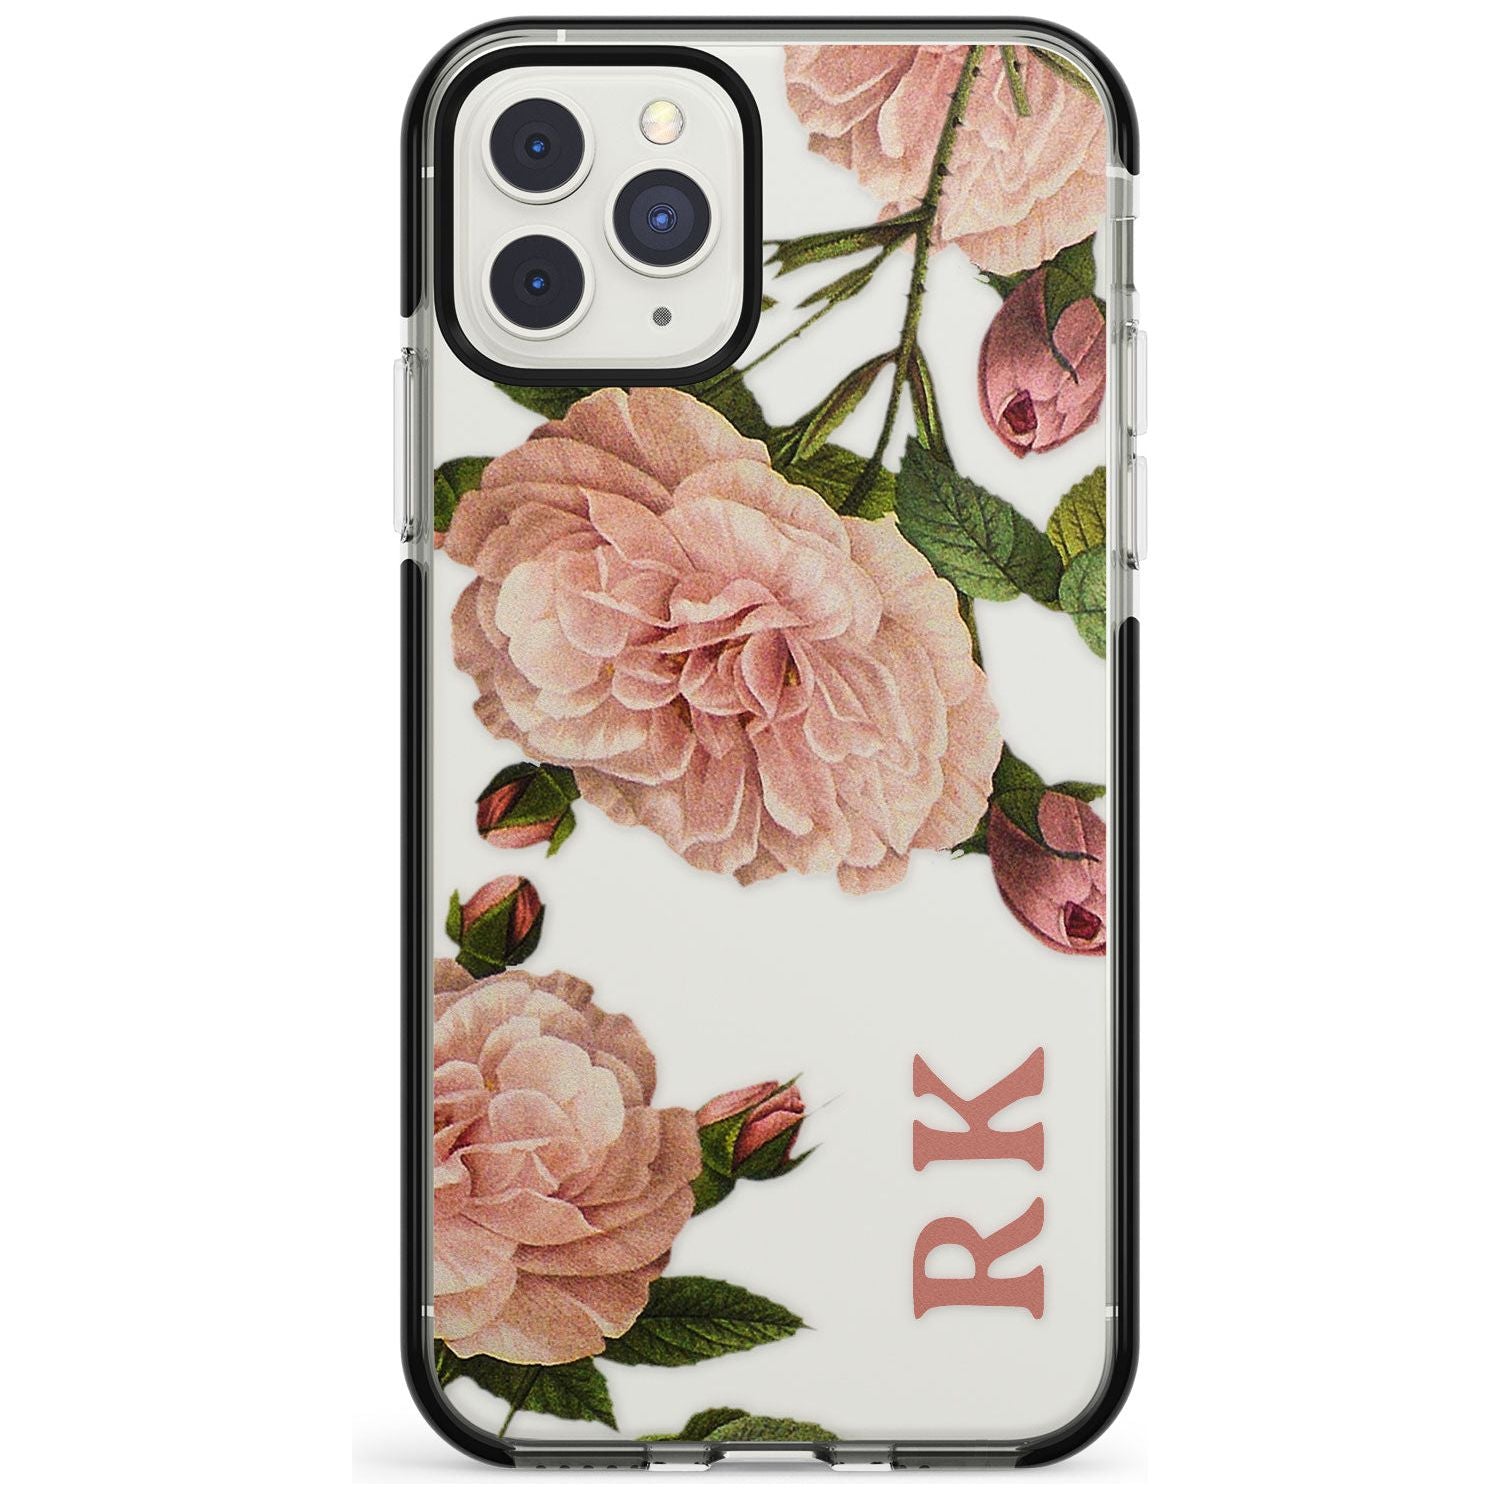 Custom Clear Vintage Floral Pale Pink Peonies Black Impact Phone Case for iPhone 11 Pro Max